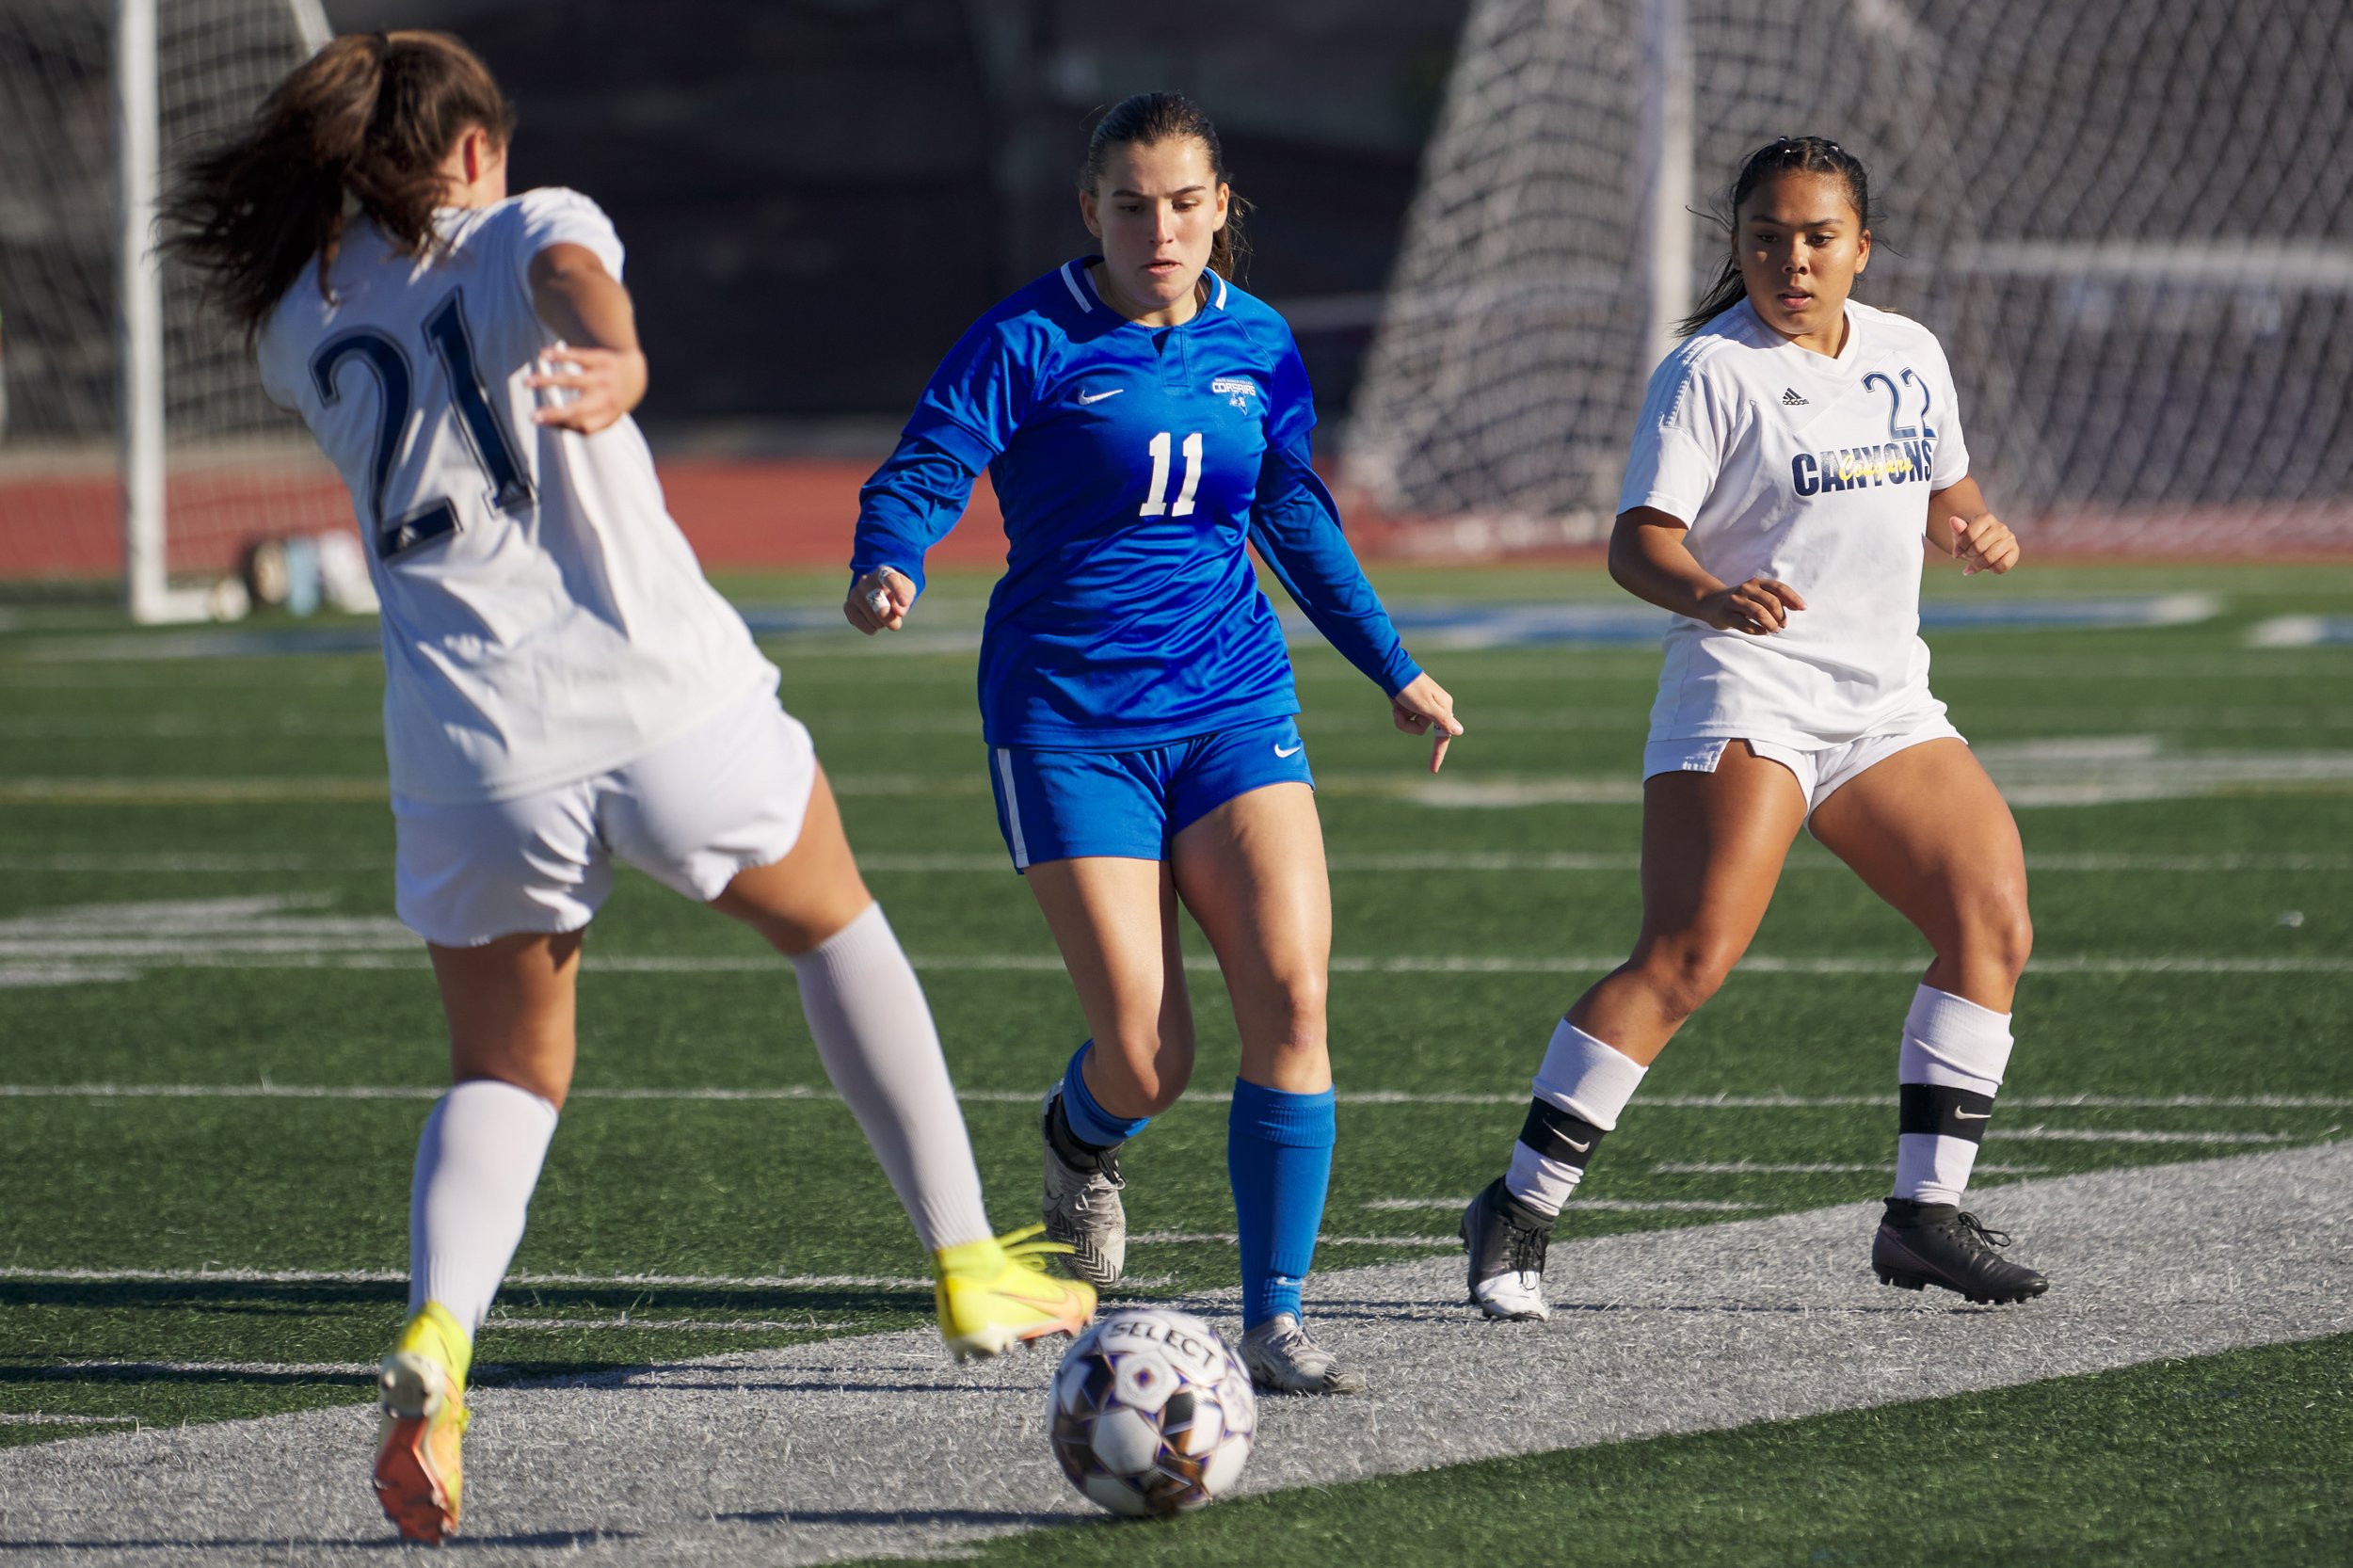  College of the Canyons Cougars' Laurel Durkin, Emma Amaya, and Santa Monica College Corsairs' Eden Bechnainou during the women's soccer match on Thursday, Nov. 10, 2022, at Corsair Field in Santa Monica, Calif. The Corsairs lost 3-0. (Nicholas McCal